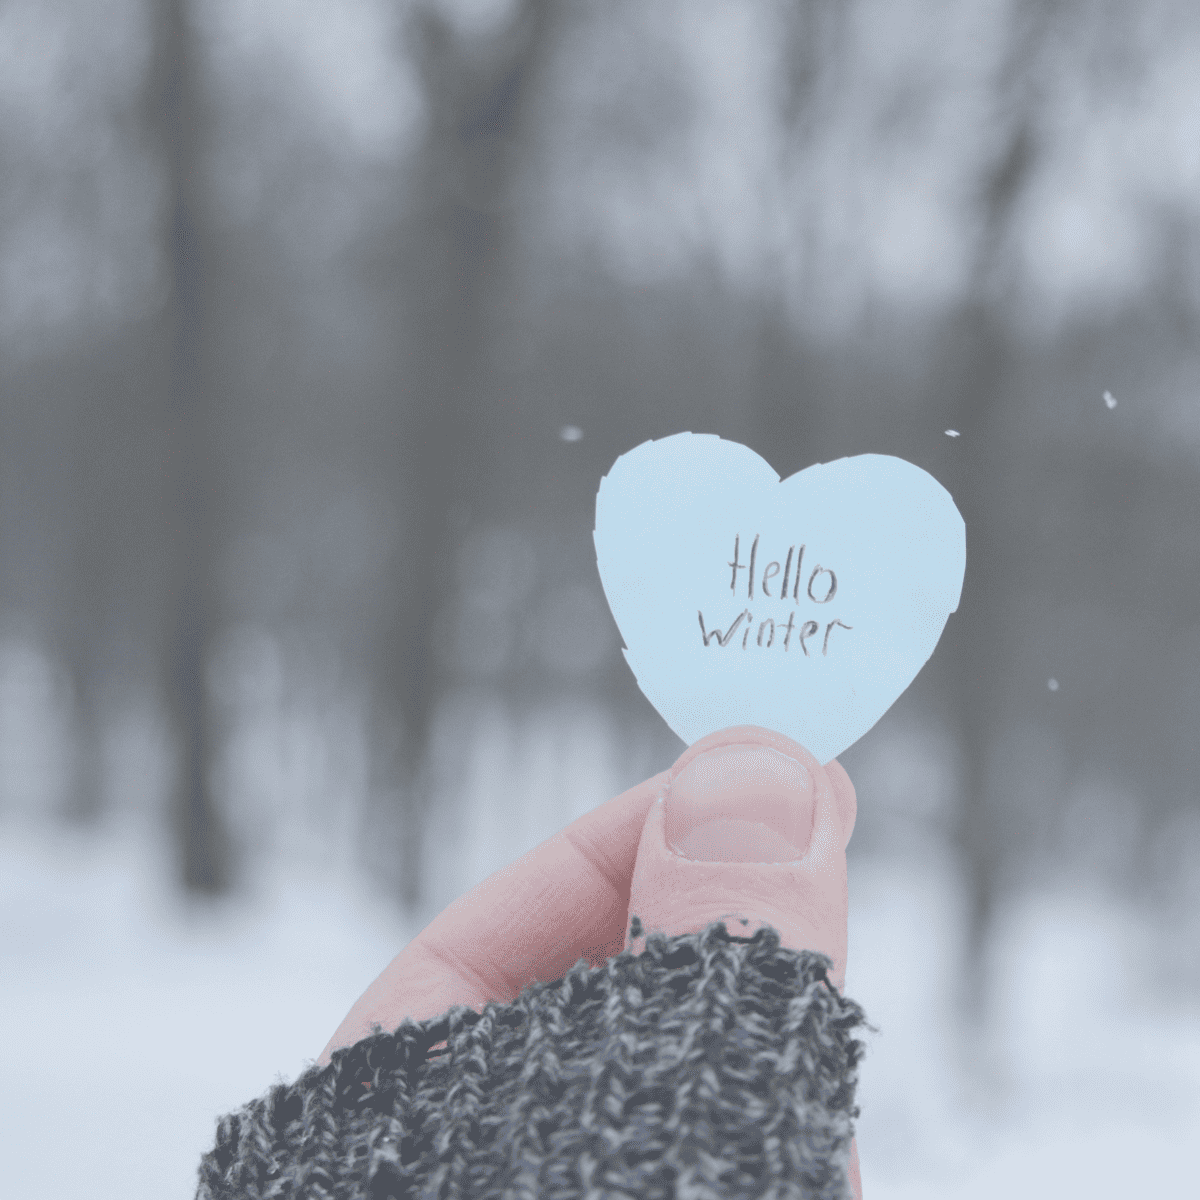 Woman holding a cut out paper heart with "hello winter" written on it.